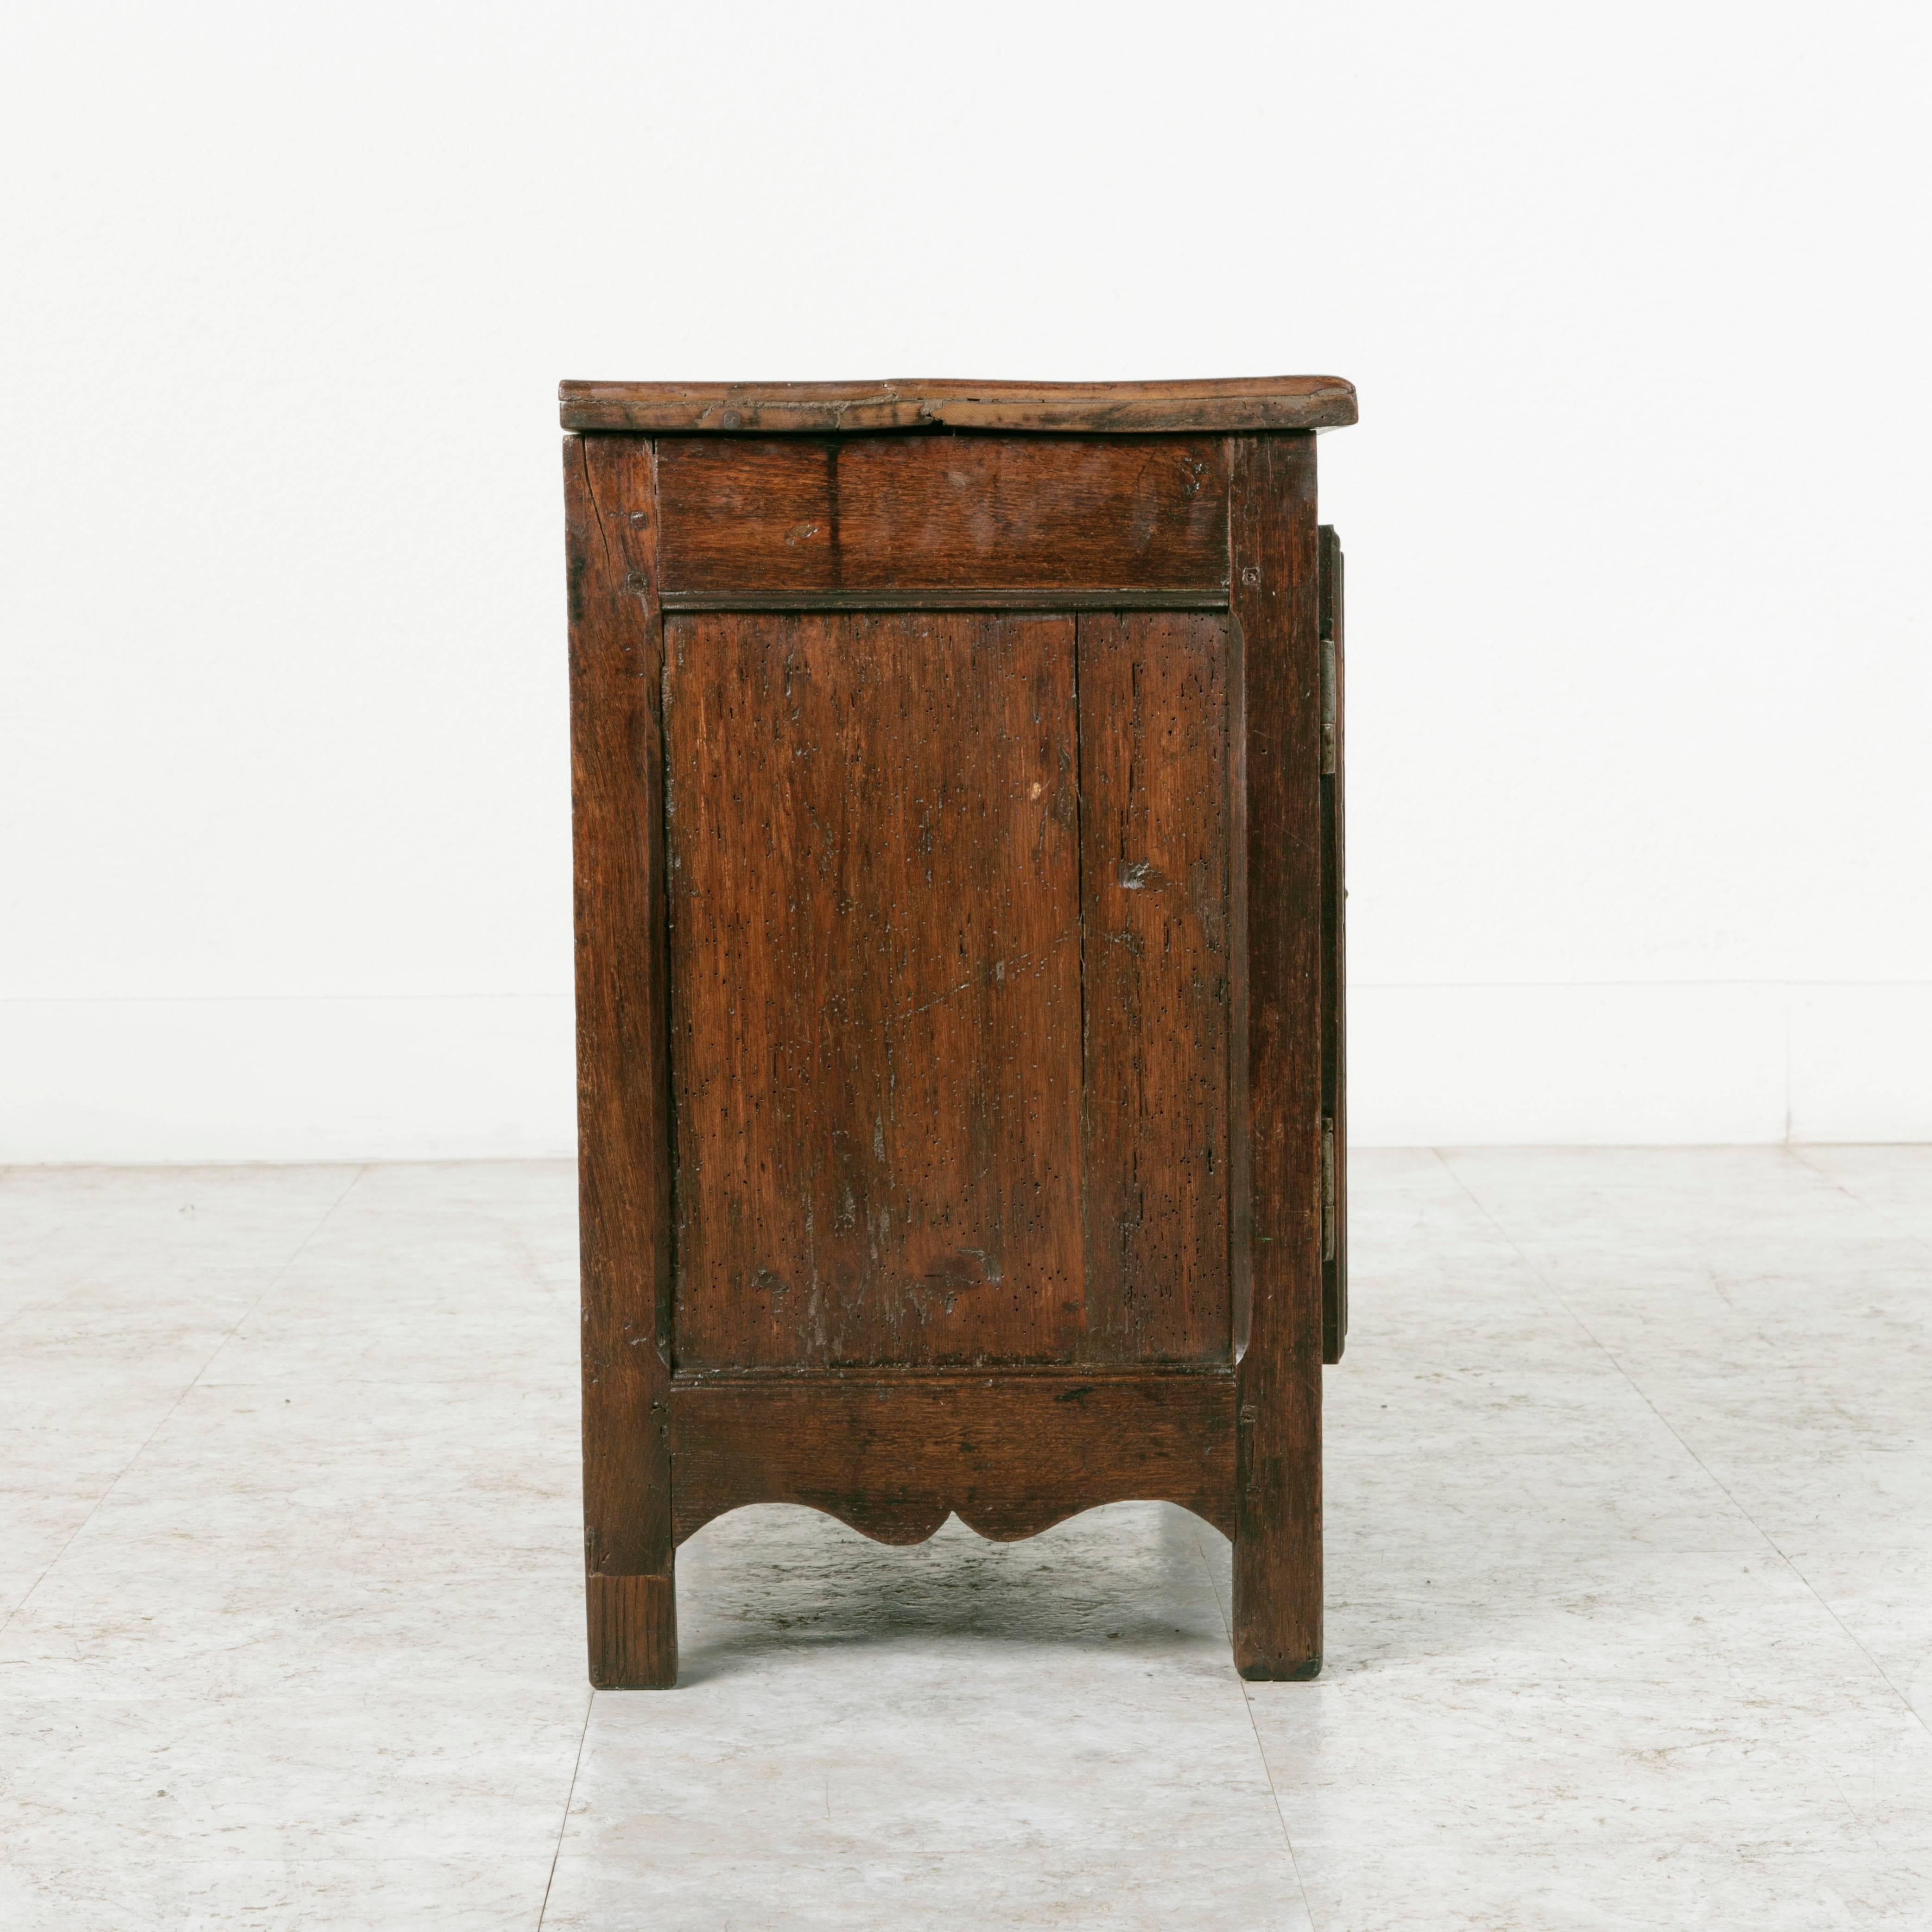 This beautifully aged small side cabinet was created in the late 1700's in Normandy. A simple and well constructed piece of solid hand pegged oak, this cabinet still has its original iron latch. This piece is an excellent scale for use as a